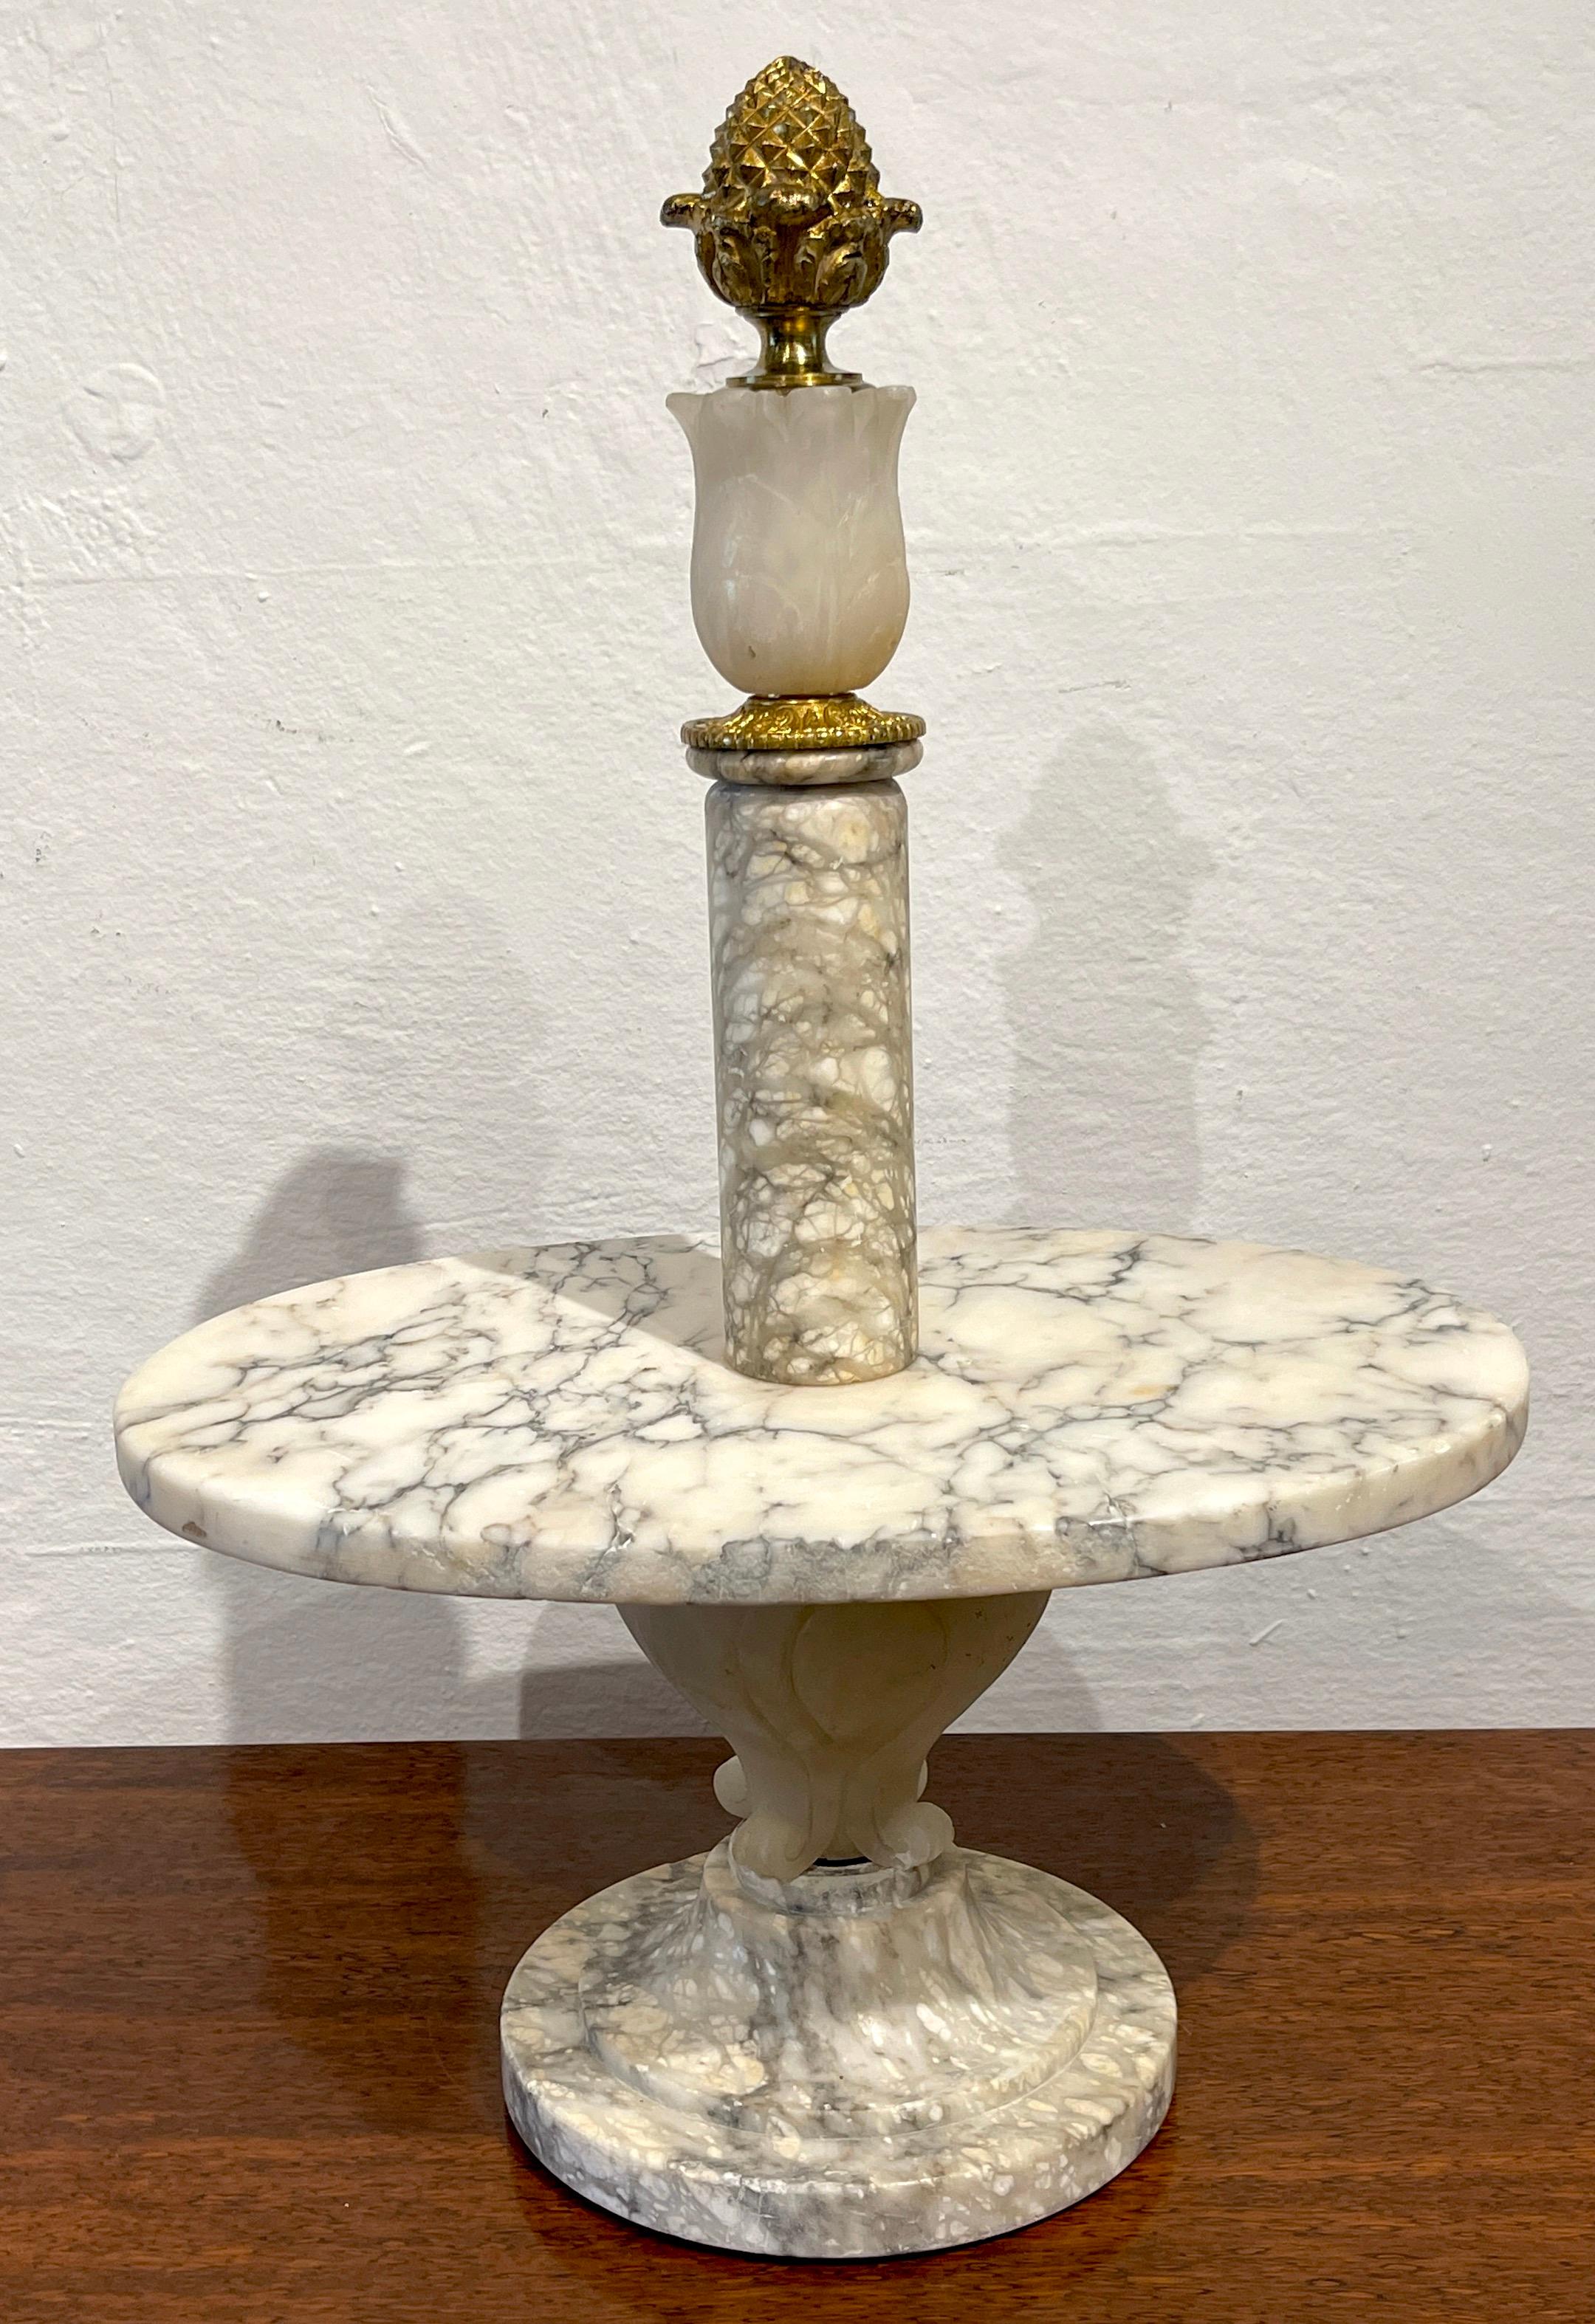 Belle Époque Antique French Neoclassical Marble & Ormolu Pastry Centerpiece / Tazza  For Sale